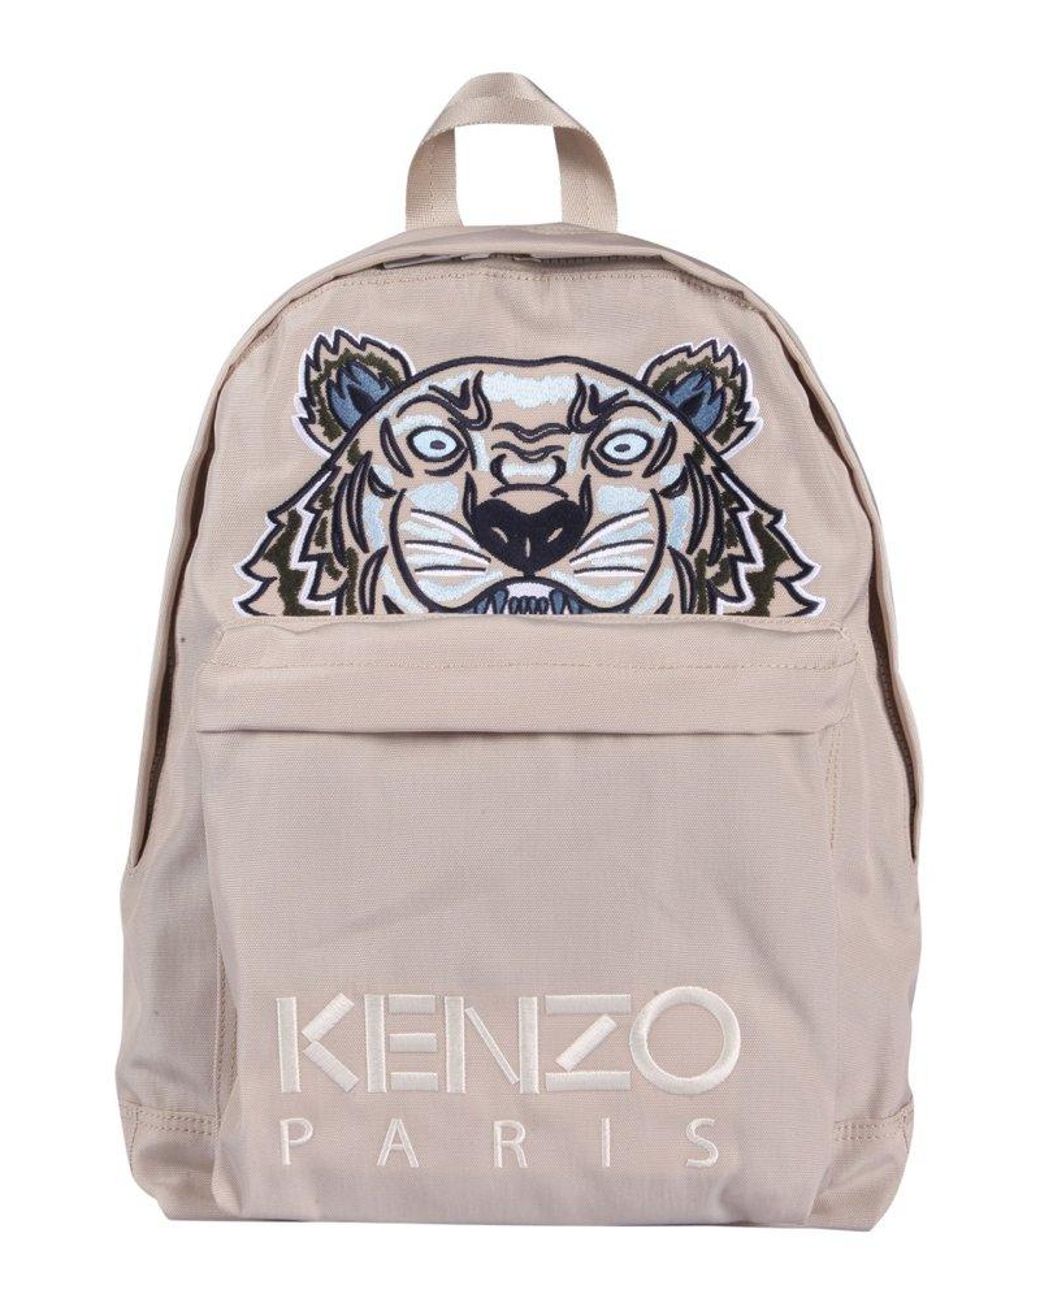 KENZO Large Tiger Logo Backpack in Natural | Lyst